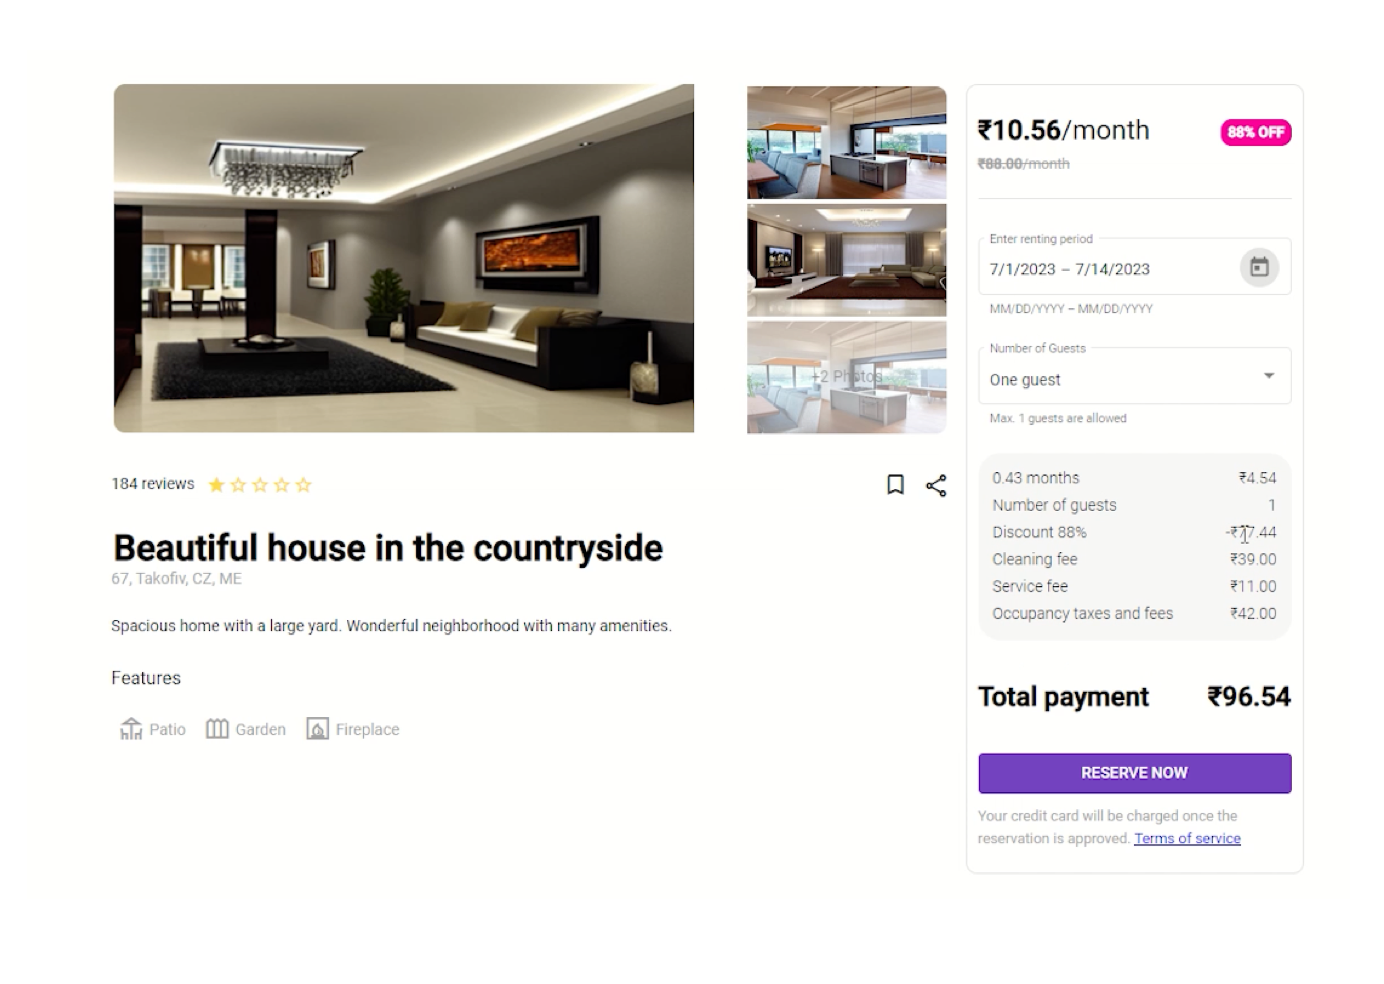 Screenshot of Contoso portal property page showing property images, details, and offering a user the ability to reserve the property with a payment form.